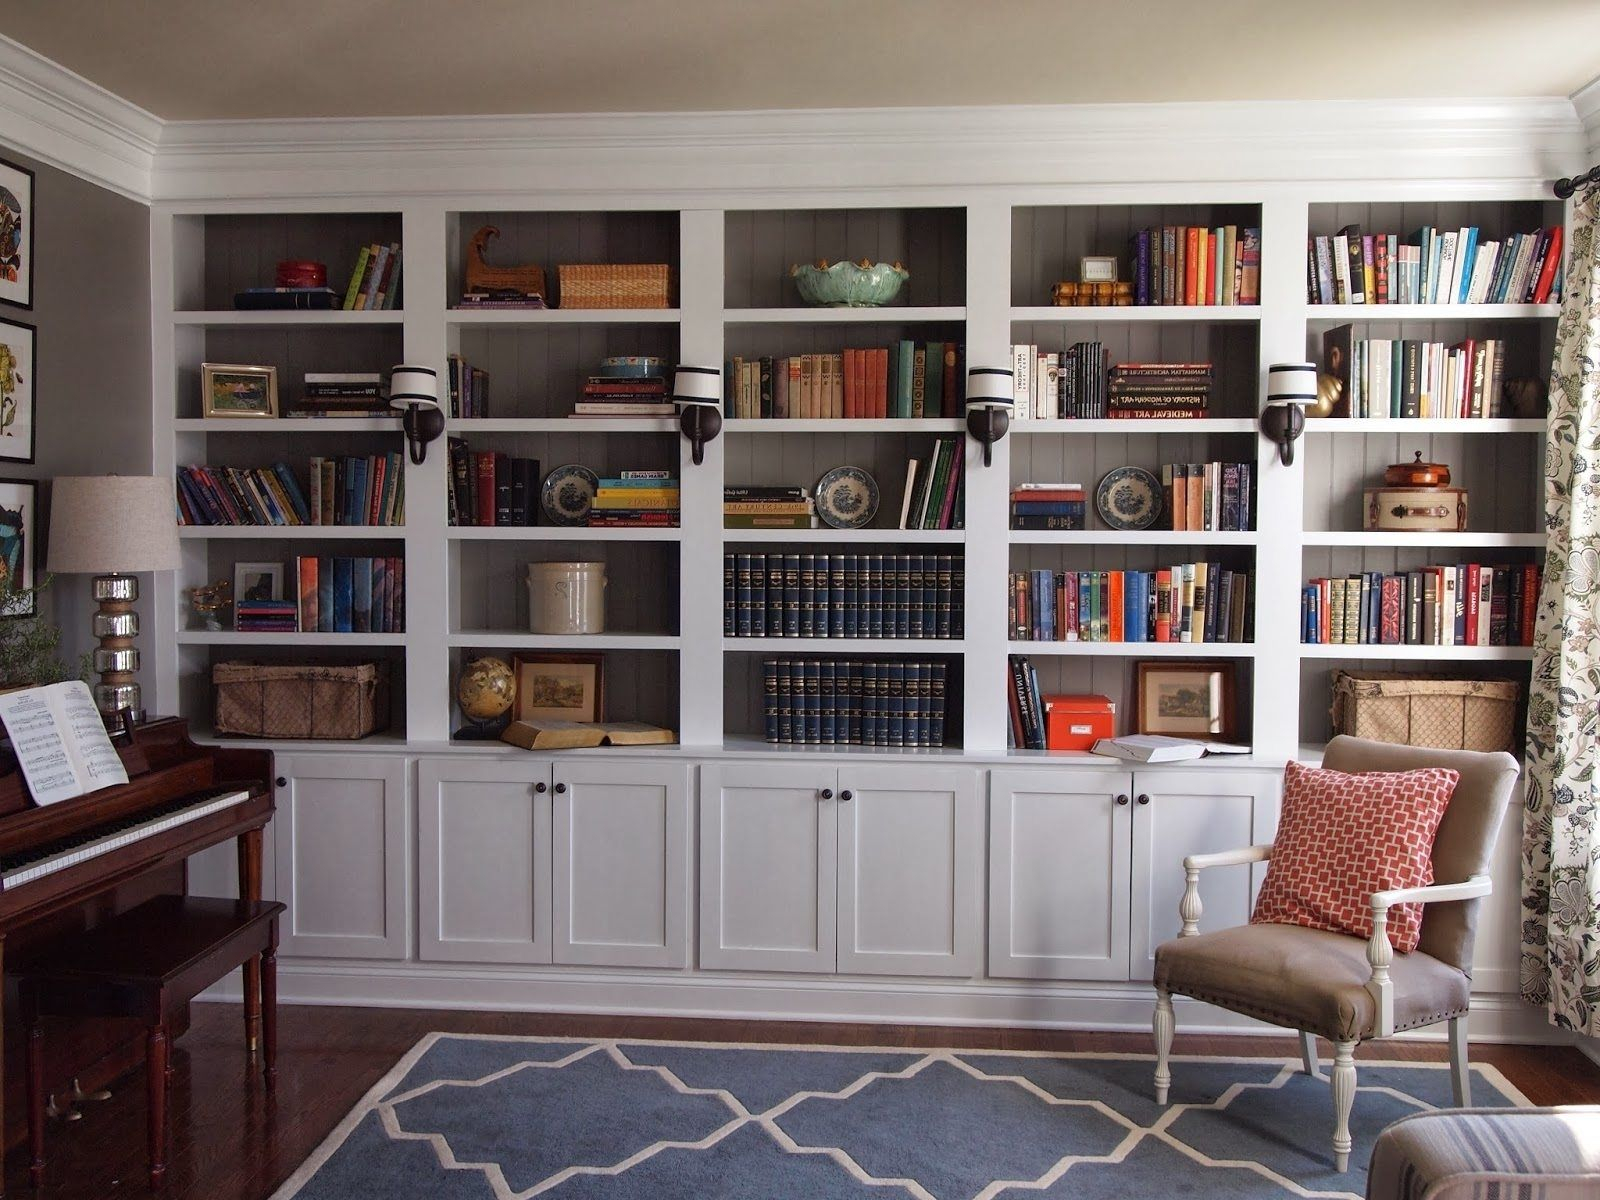 Outstanding Shelves Built Into Wall Recessed Shelving Kit intended for measurements 1600 X 1200